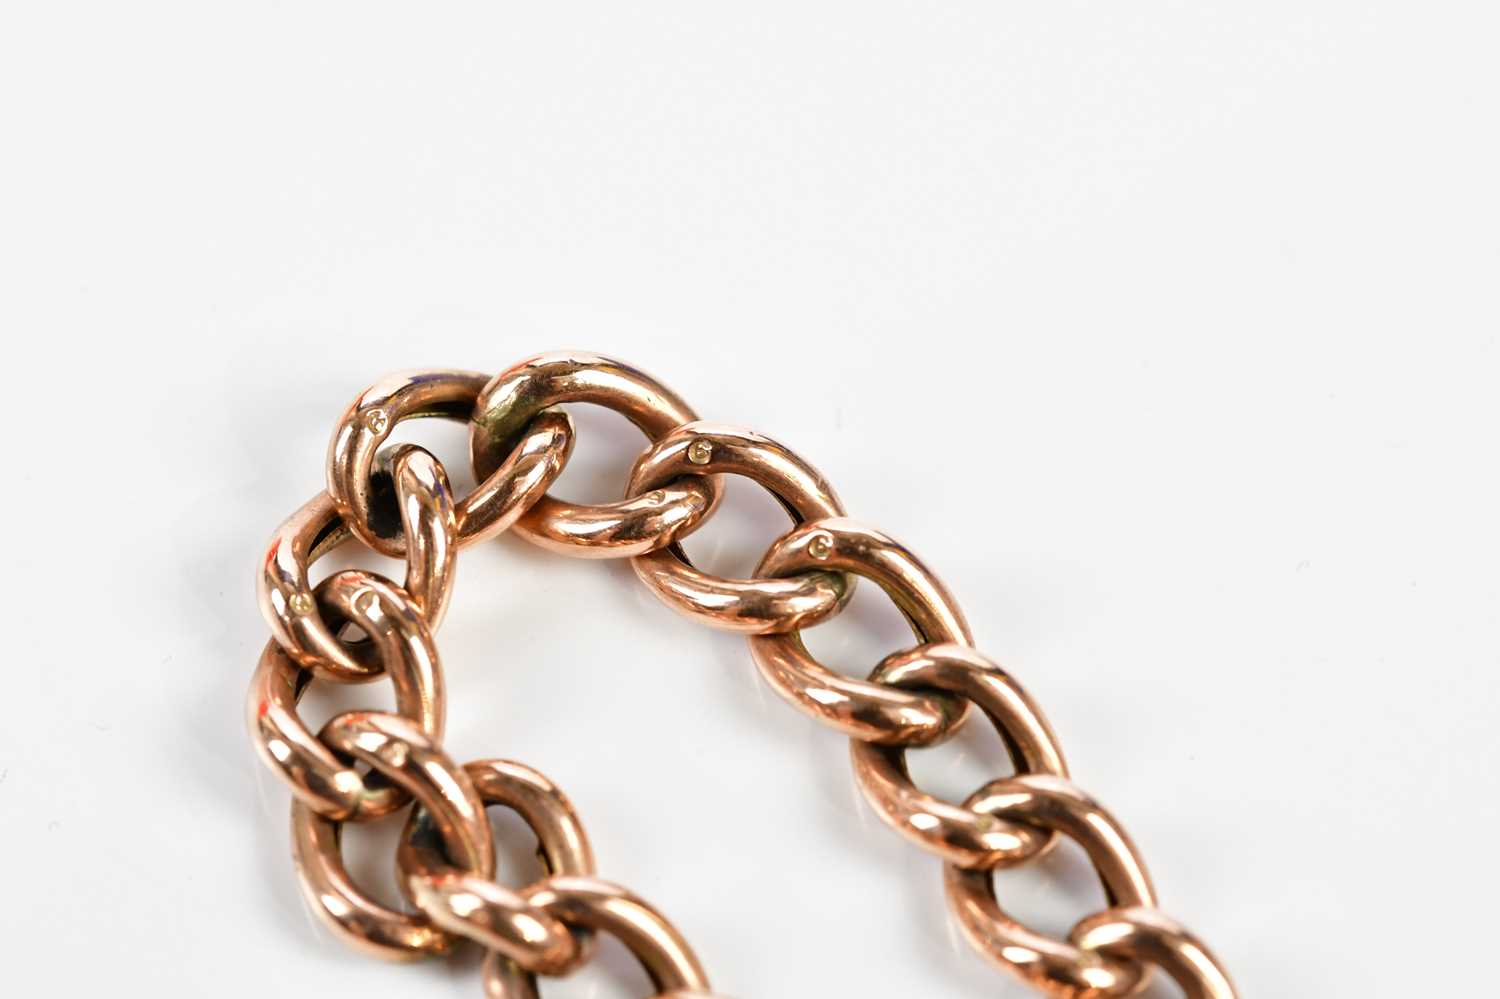 A 9ct rose gold hollow curb link bracelet with padlock and safety chain, approx. 15.85g. - Image 4 of 5